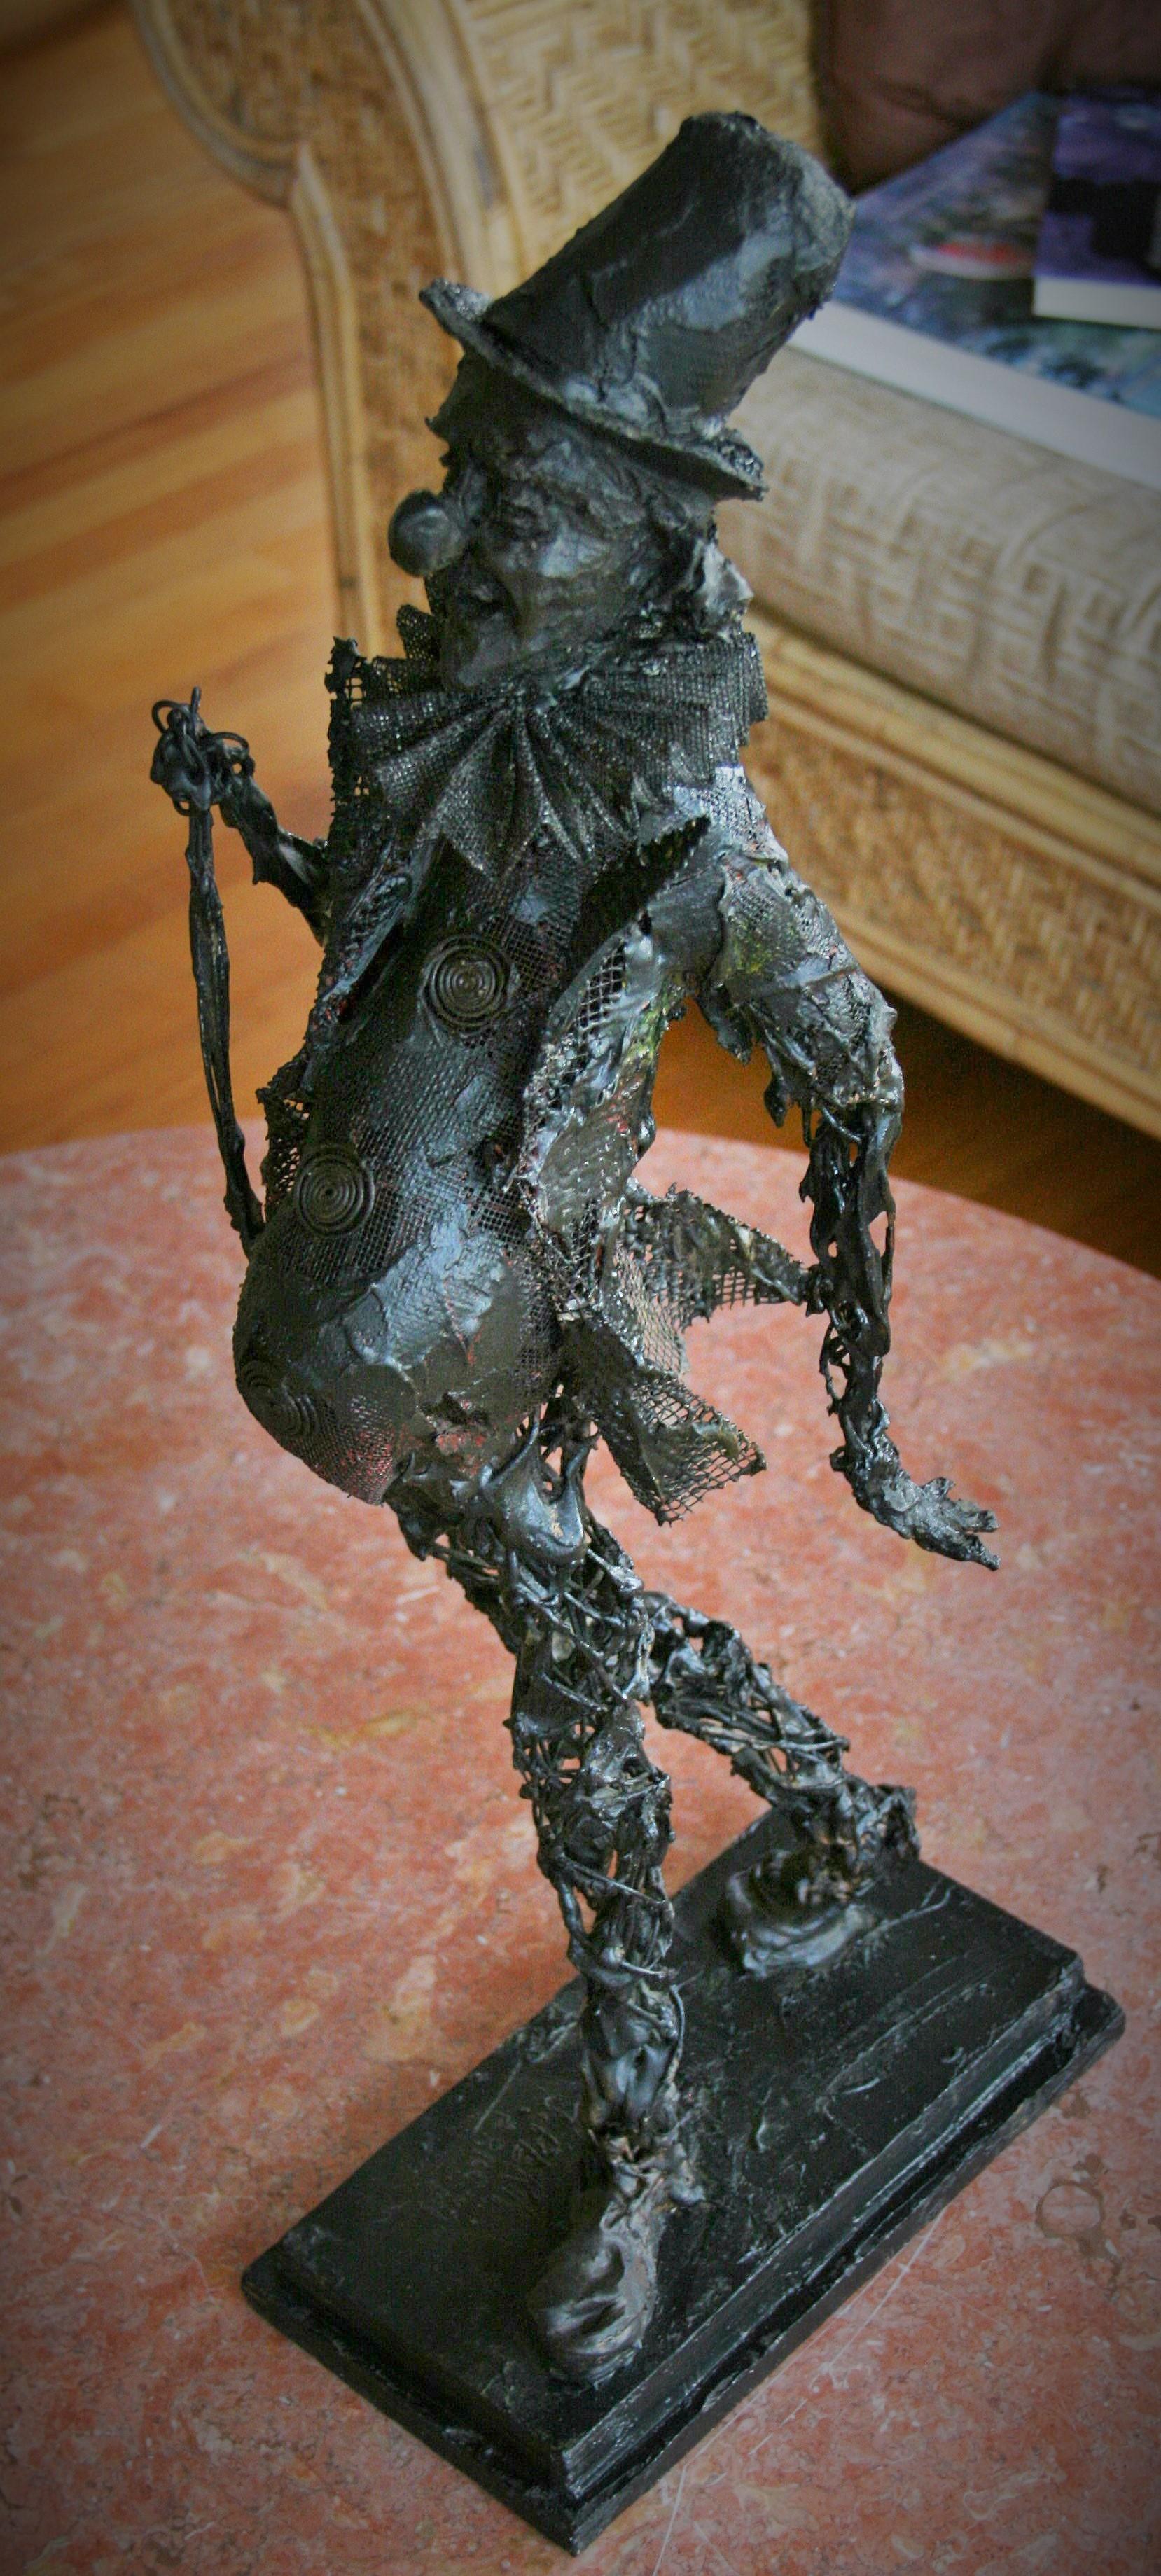 8-216 Hand made wire figural sculpture on a stepped wood base signed J.Pena 74